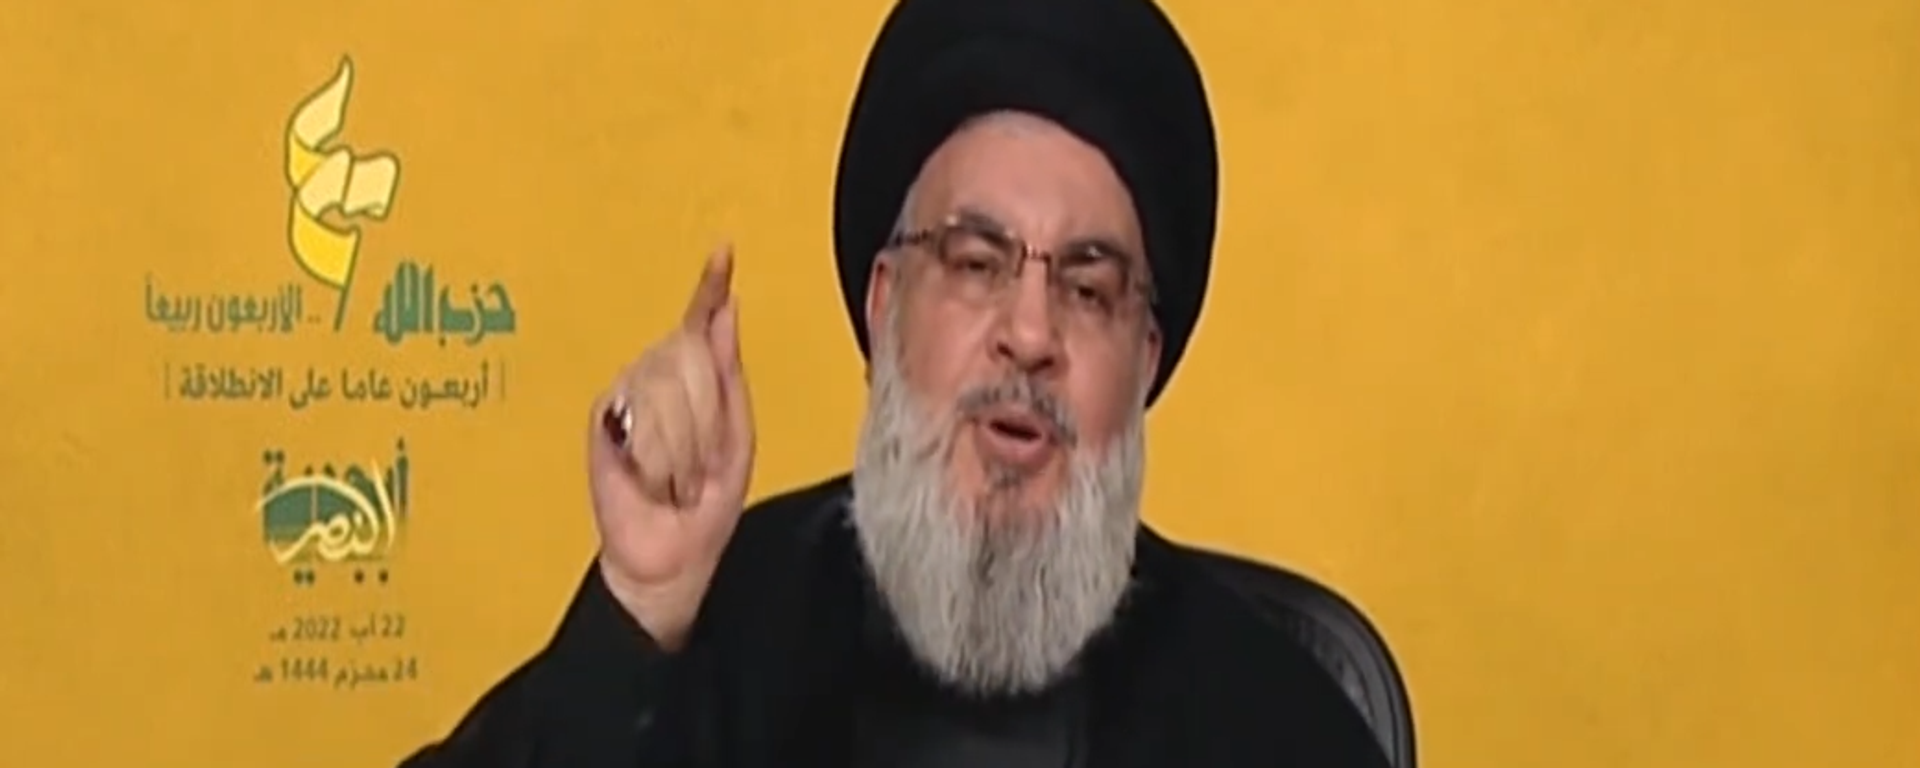 Hezbollah Secretary-General Hassan Nasrallah speaks at event commemorating the 40th anniversary of the creation of the political and militant group. August 22, 2022. - Sputnik International, 1920, 01.10.2022